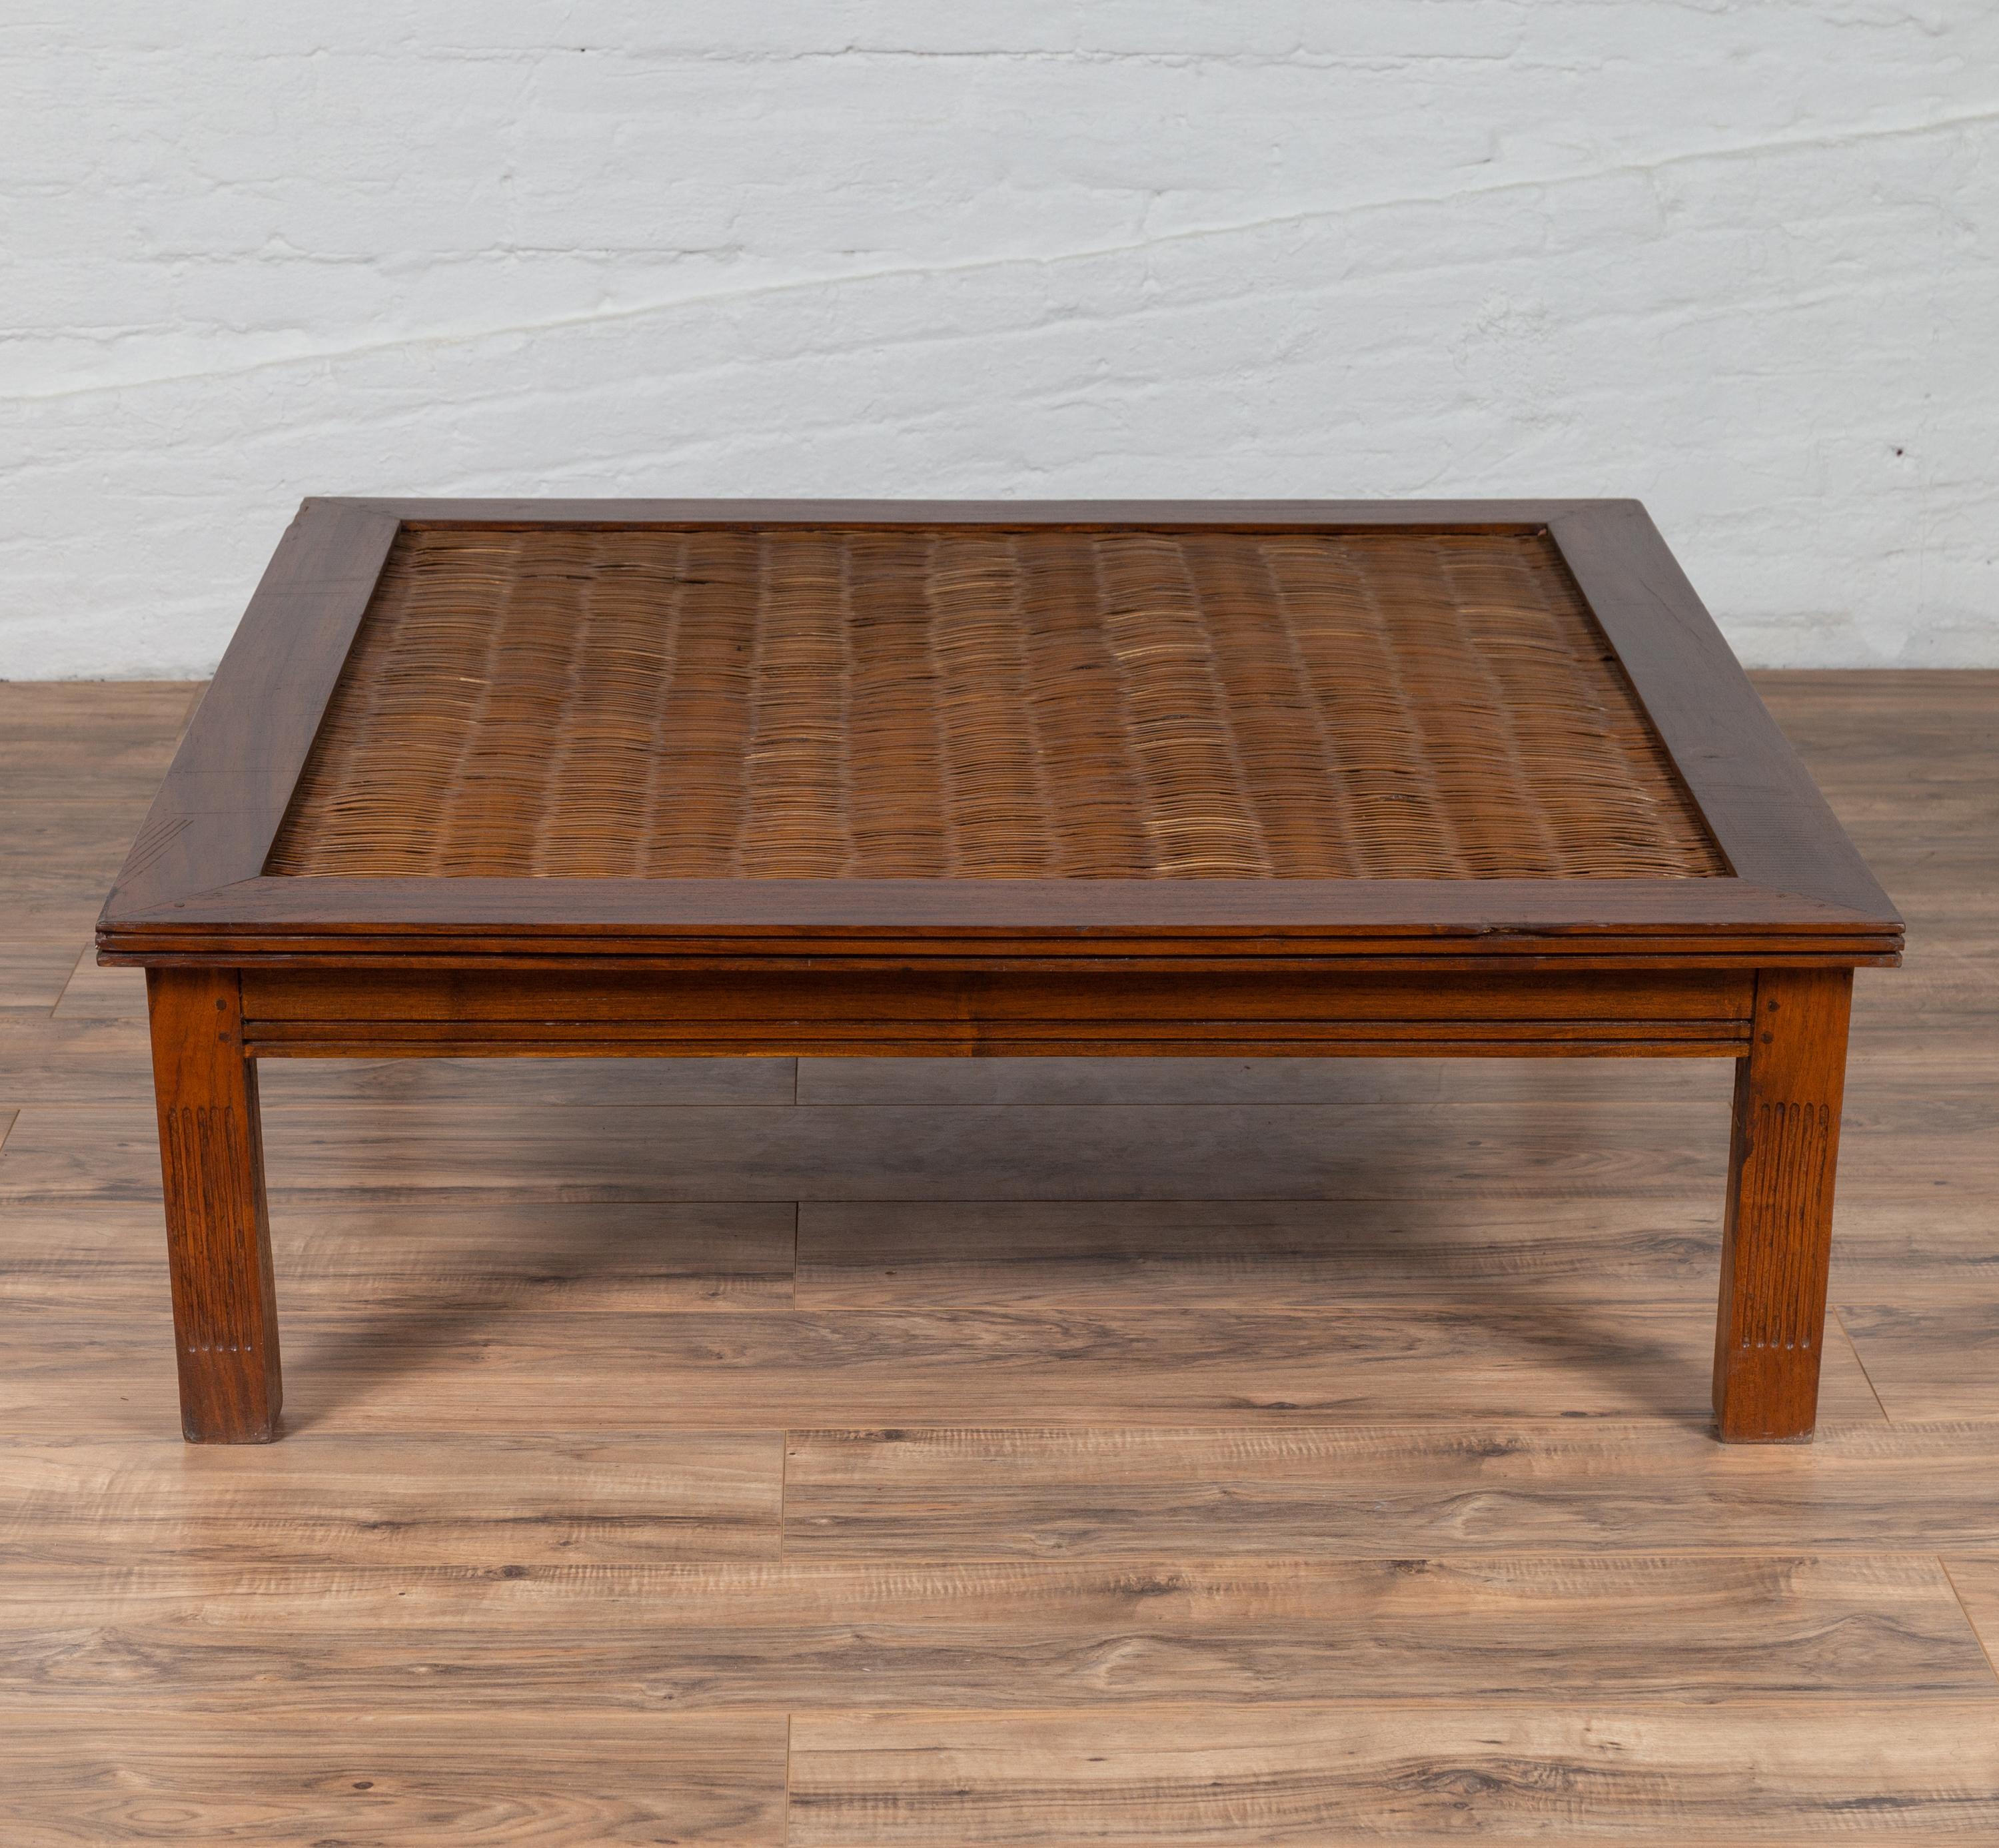 Antique Chinese Square-Shaped Elm Coffee Table with Rattan Inset and Fluted Legs 3